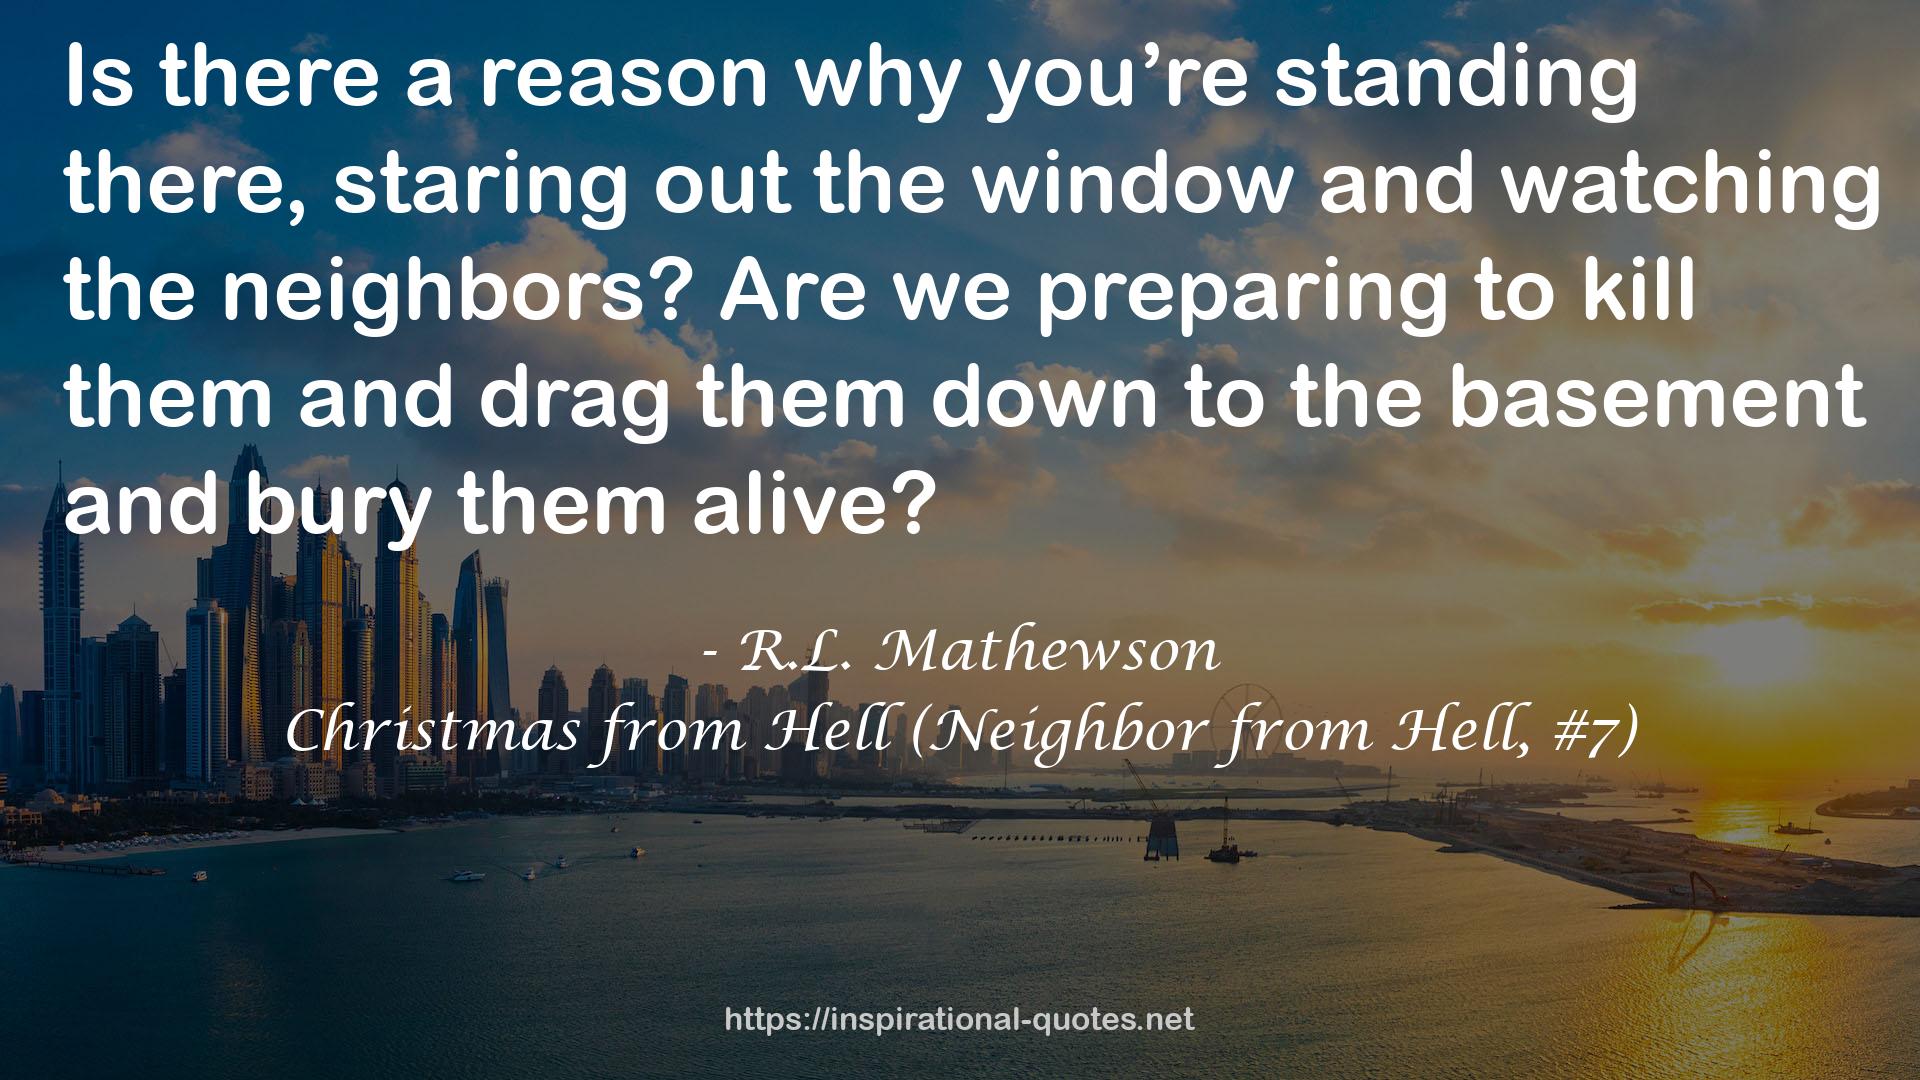 Christmas from Hell (Neighbor from Hell, #7) QUOTES